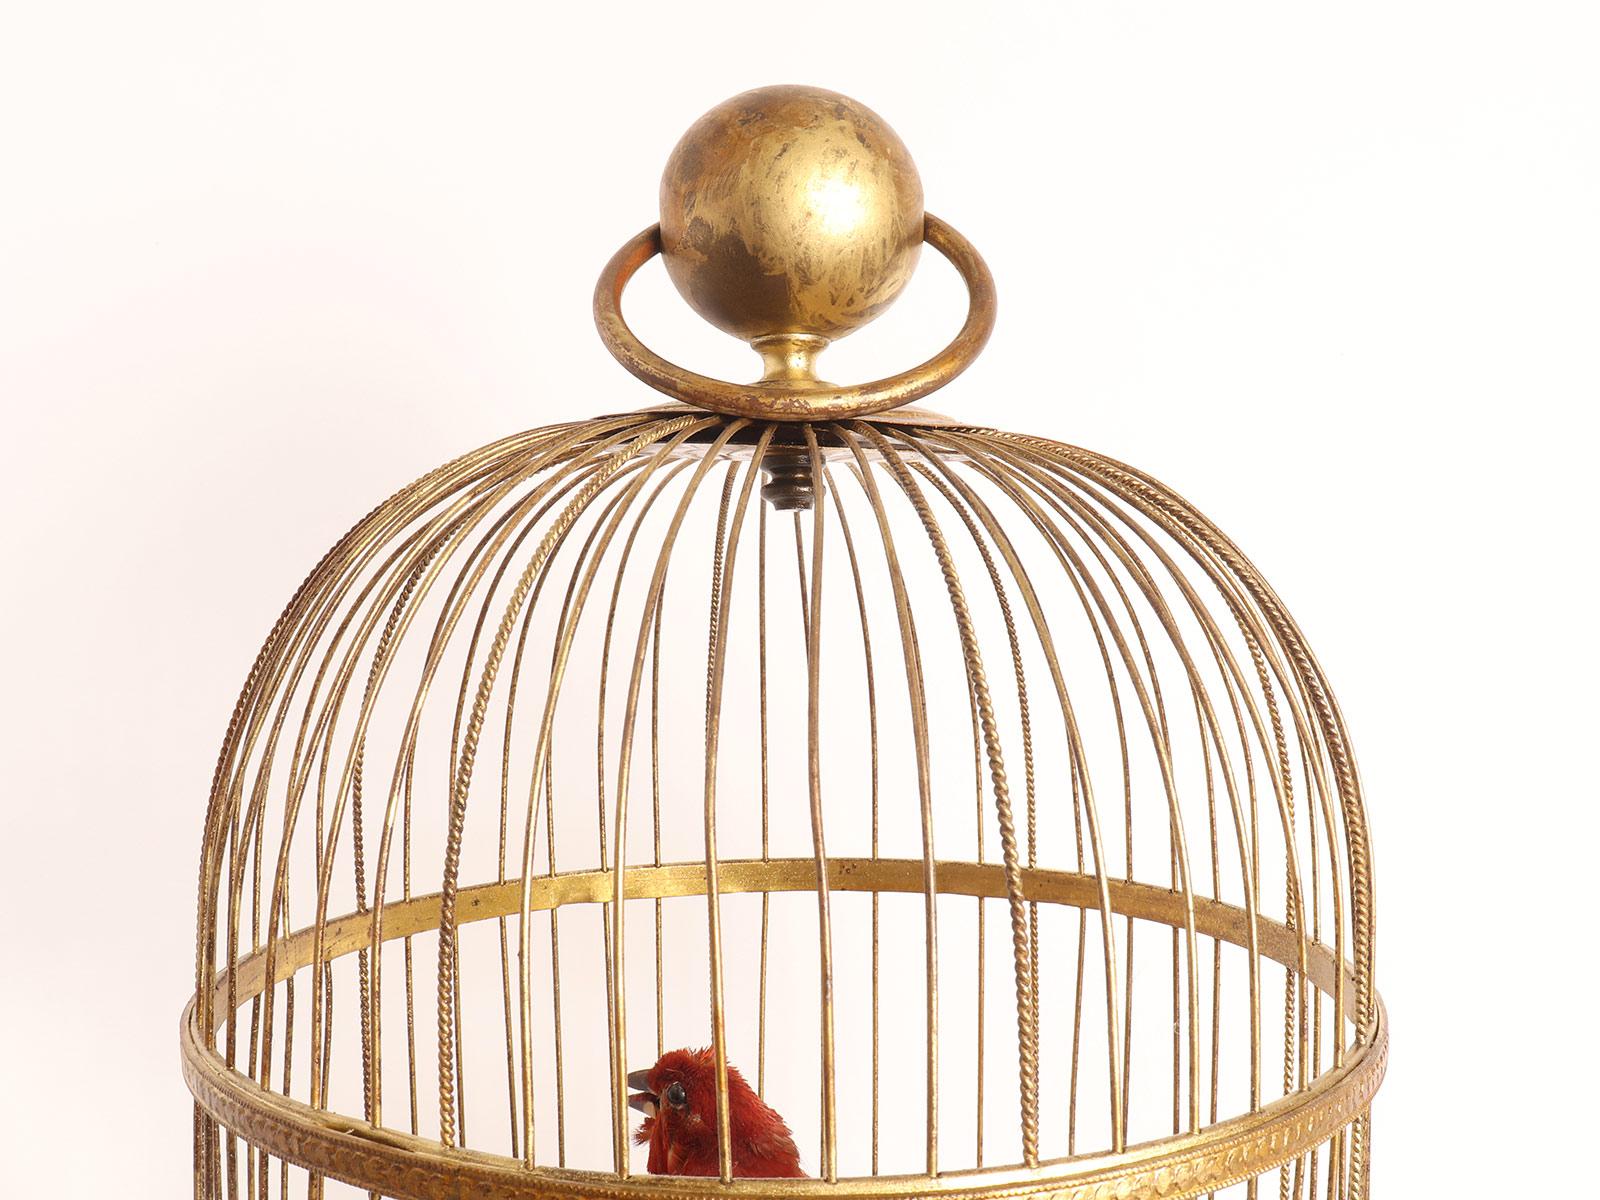 Brass Little Birds Automatons Singer in a Gilded Cage by Bontems, France, 1890